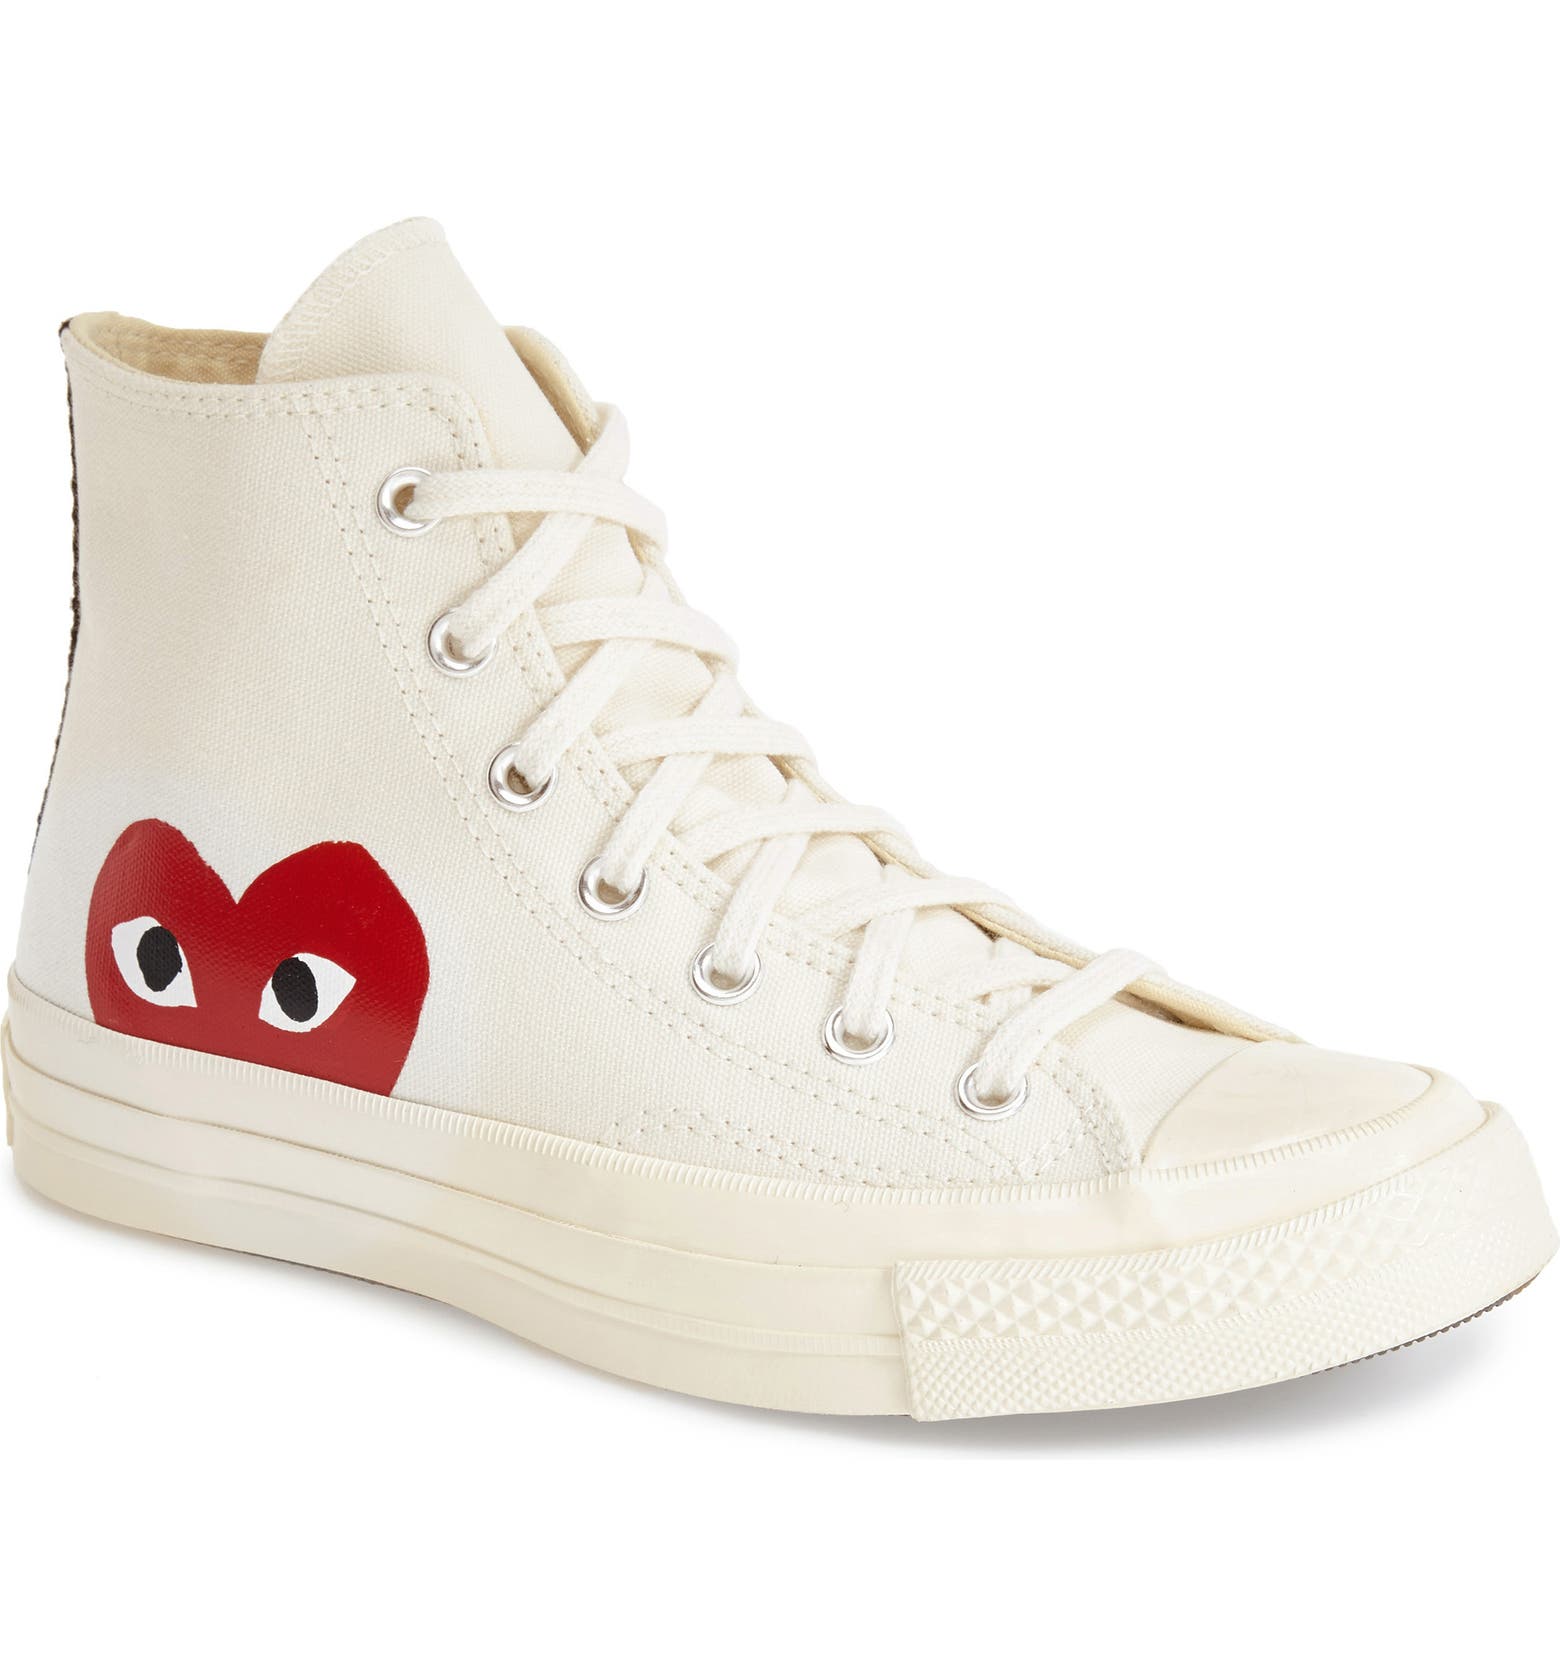 White high top Converse x Comme des Garcons sneakers